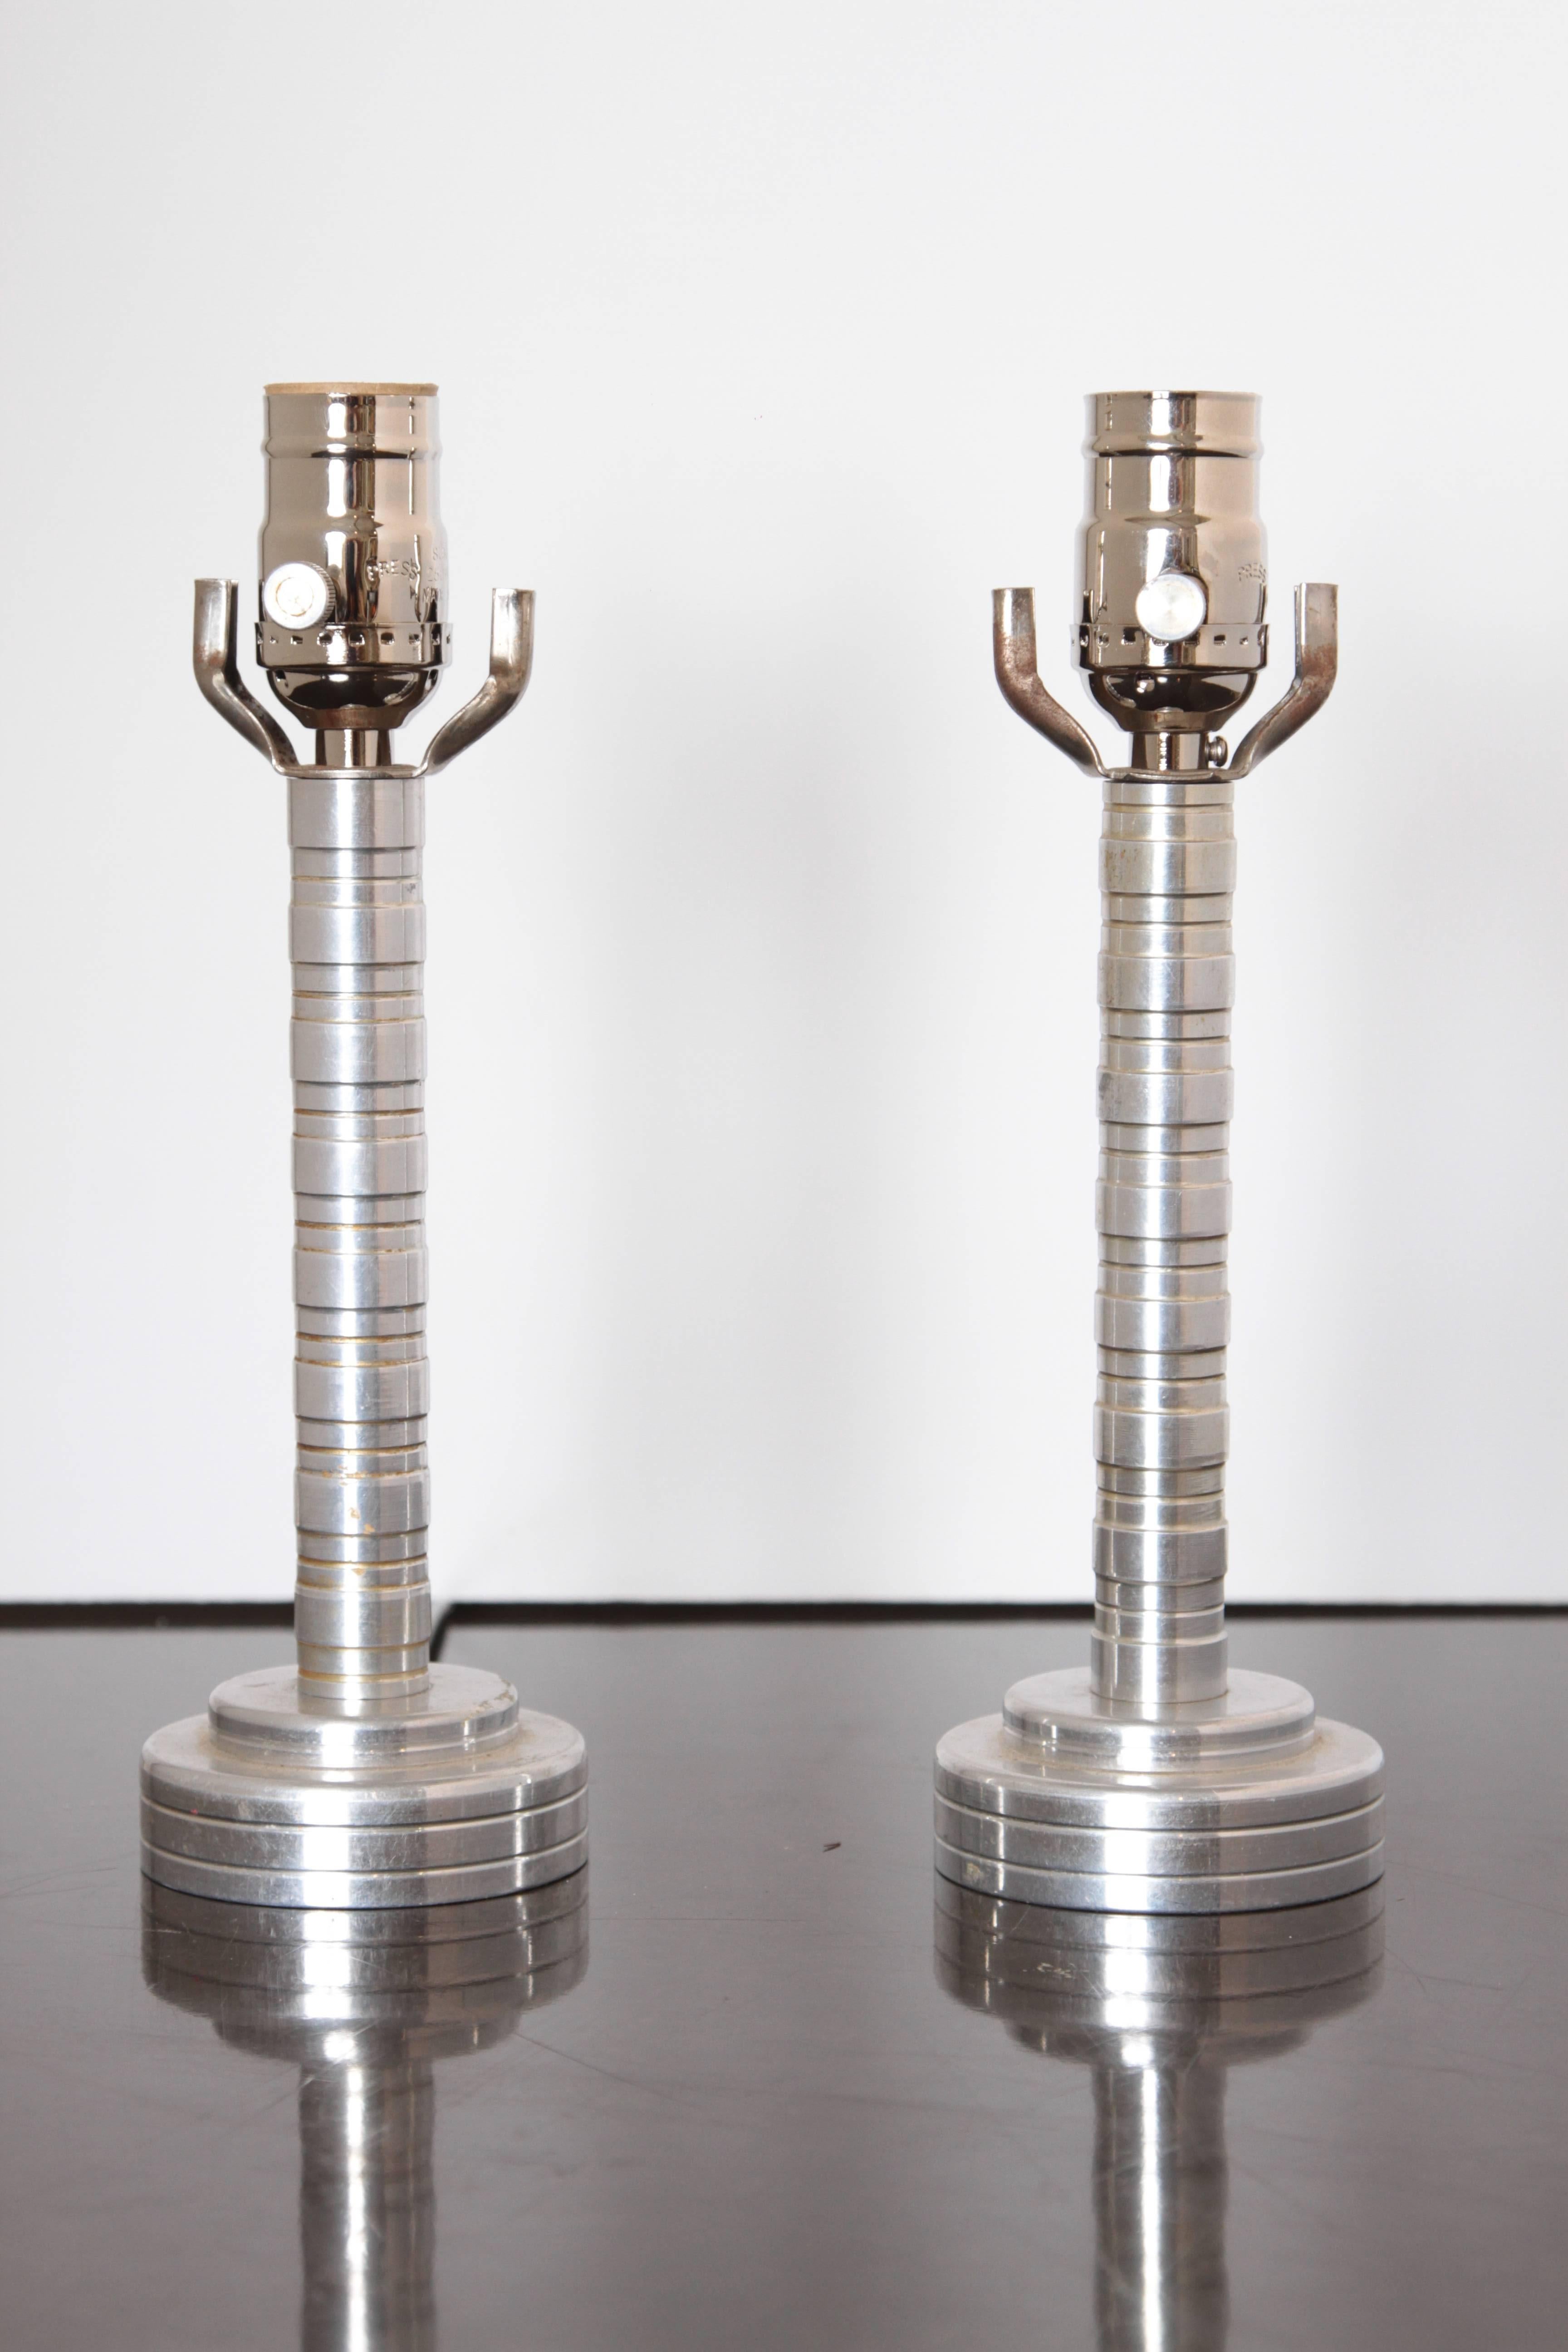 Machine Age Art Deco skyscraper pair turned, aluminium table lamps

Nice original functioning pair high-polish, engine-turned and incised aluminum desk or end table lamps.
Original chromed sockets with original aluminum twist knobs, rewired with